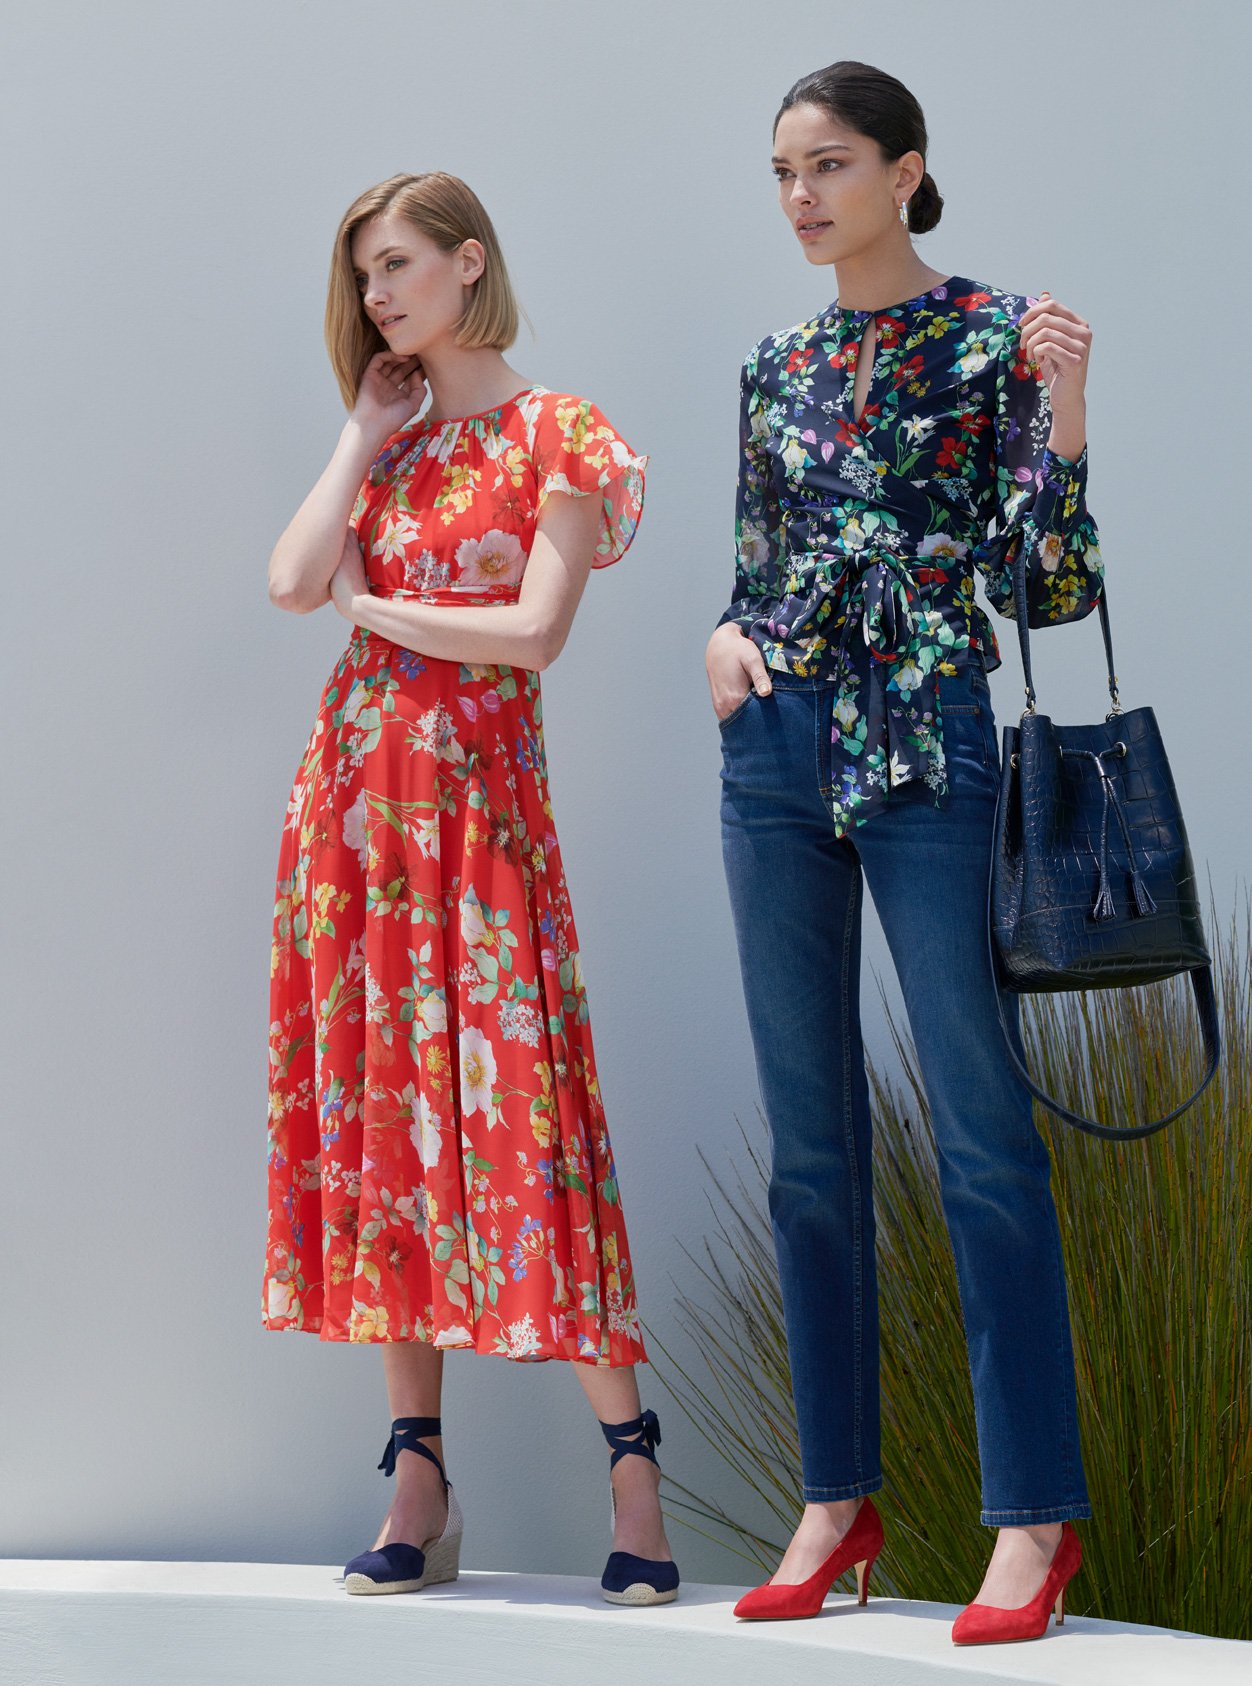 Red floral midi dress with espadrille wedge heels and a floral wrap blouse paired with blue denim jean, red court shoes and a leather bucket bag by Hobbs.